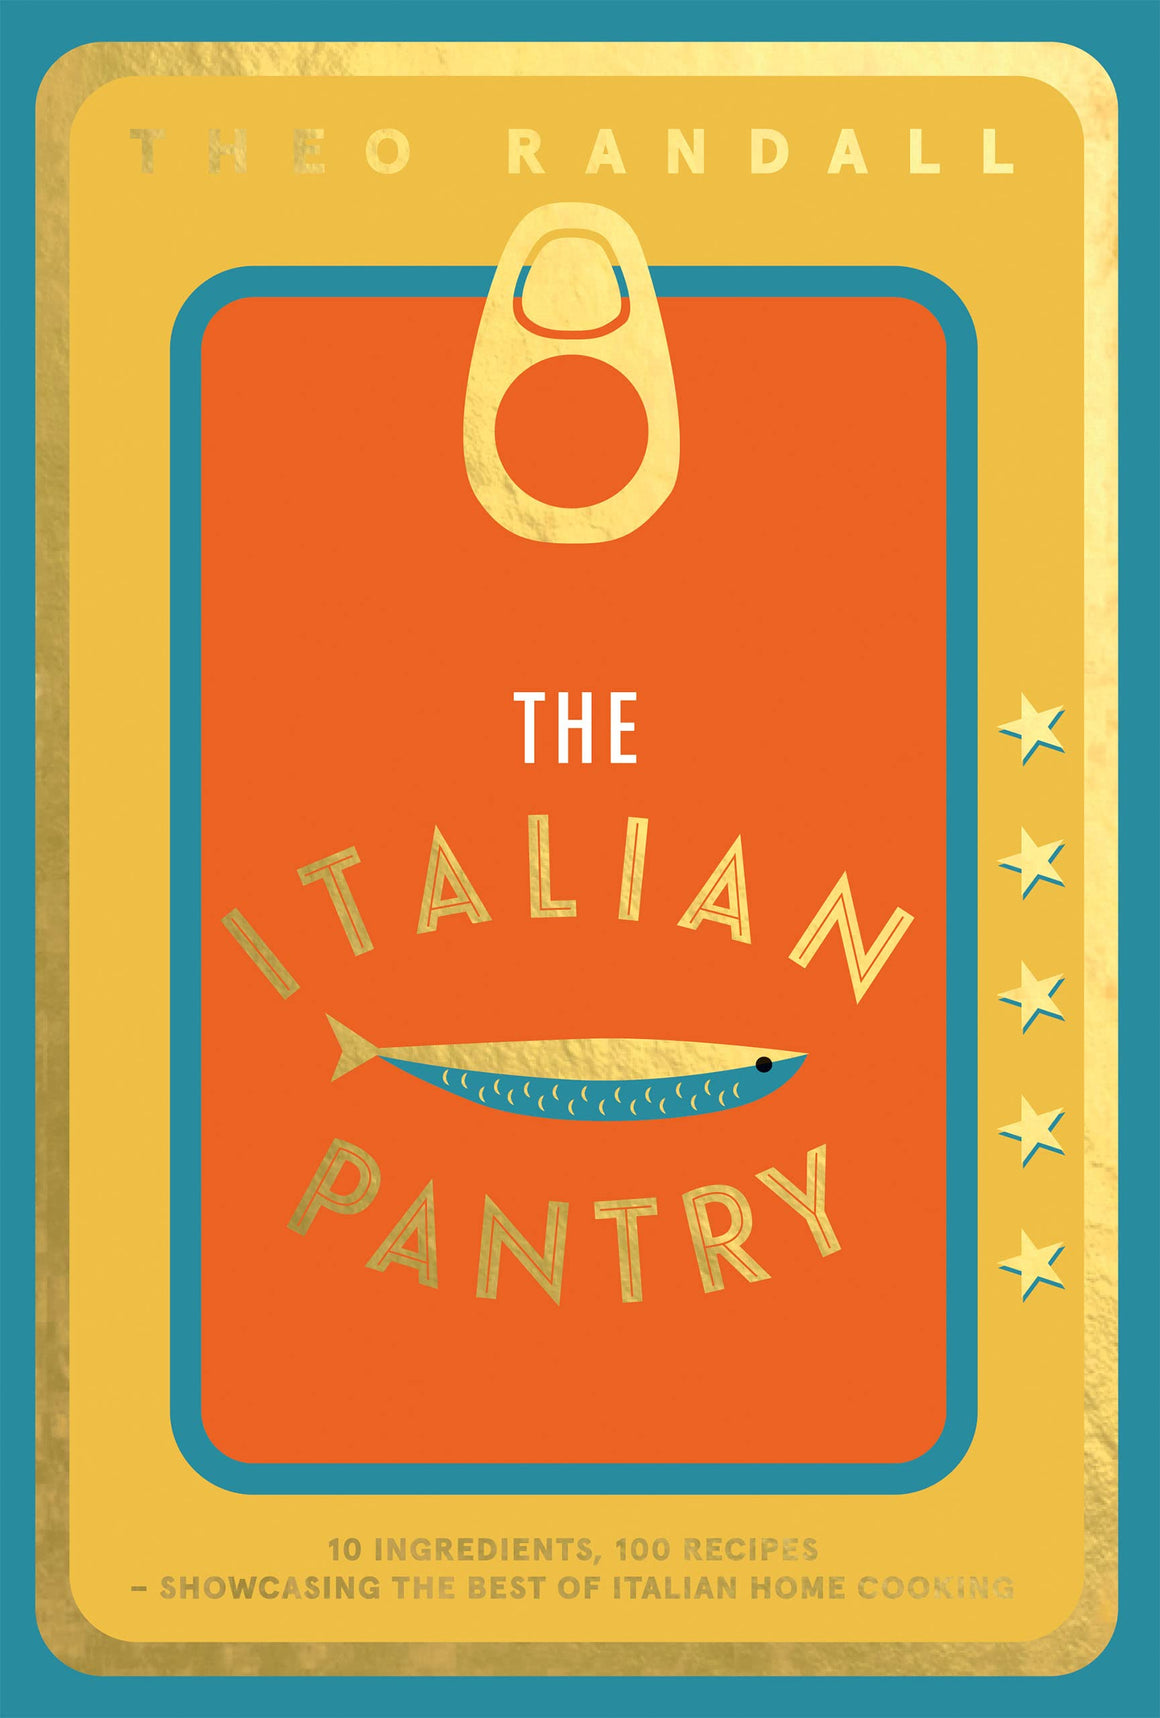 The Italian Pantry: 10 Ingredients, 100 Recipes Showcasing the Best of Italian Home Cooking (Theo Randall)